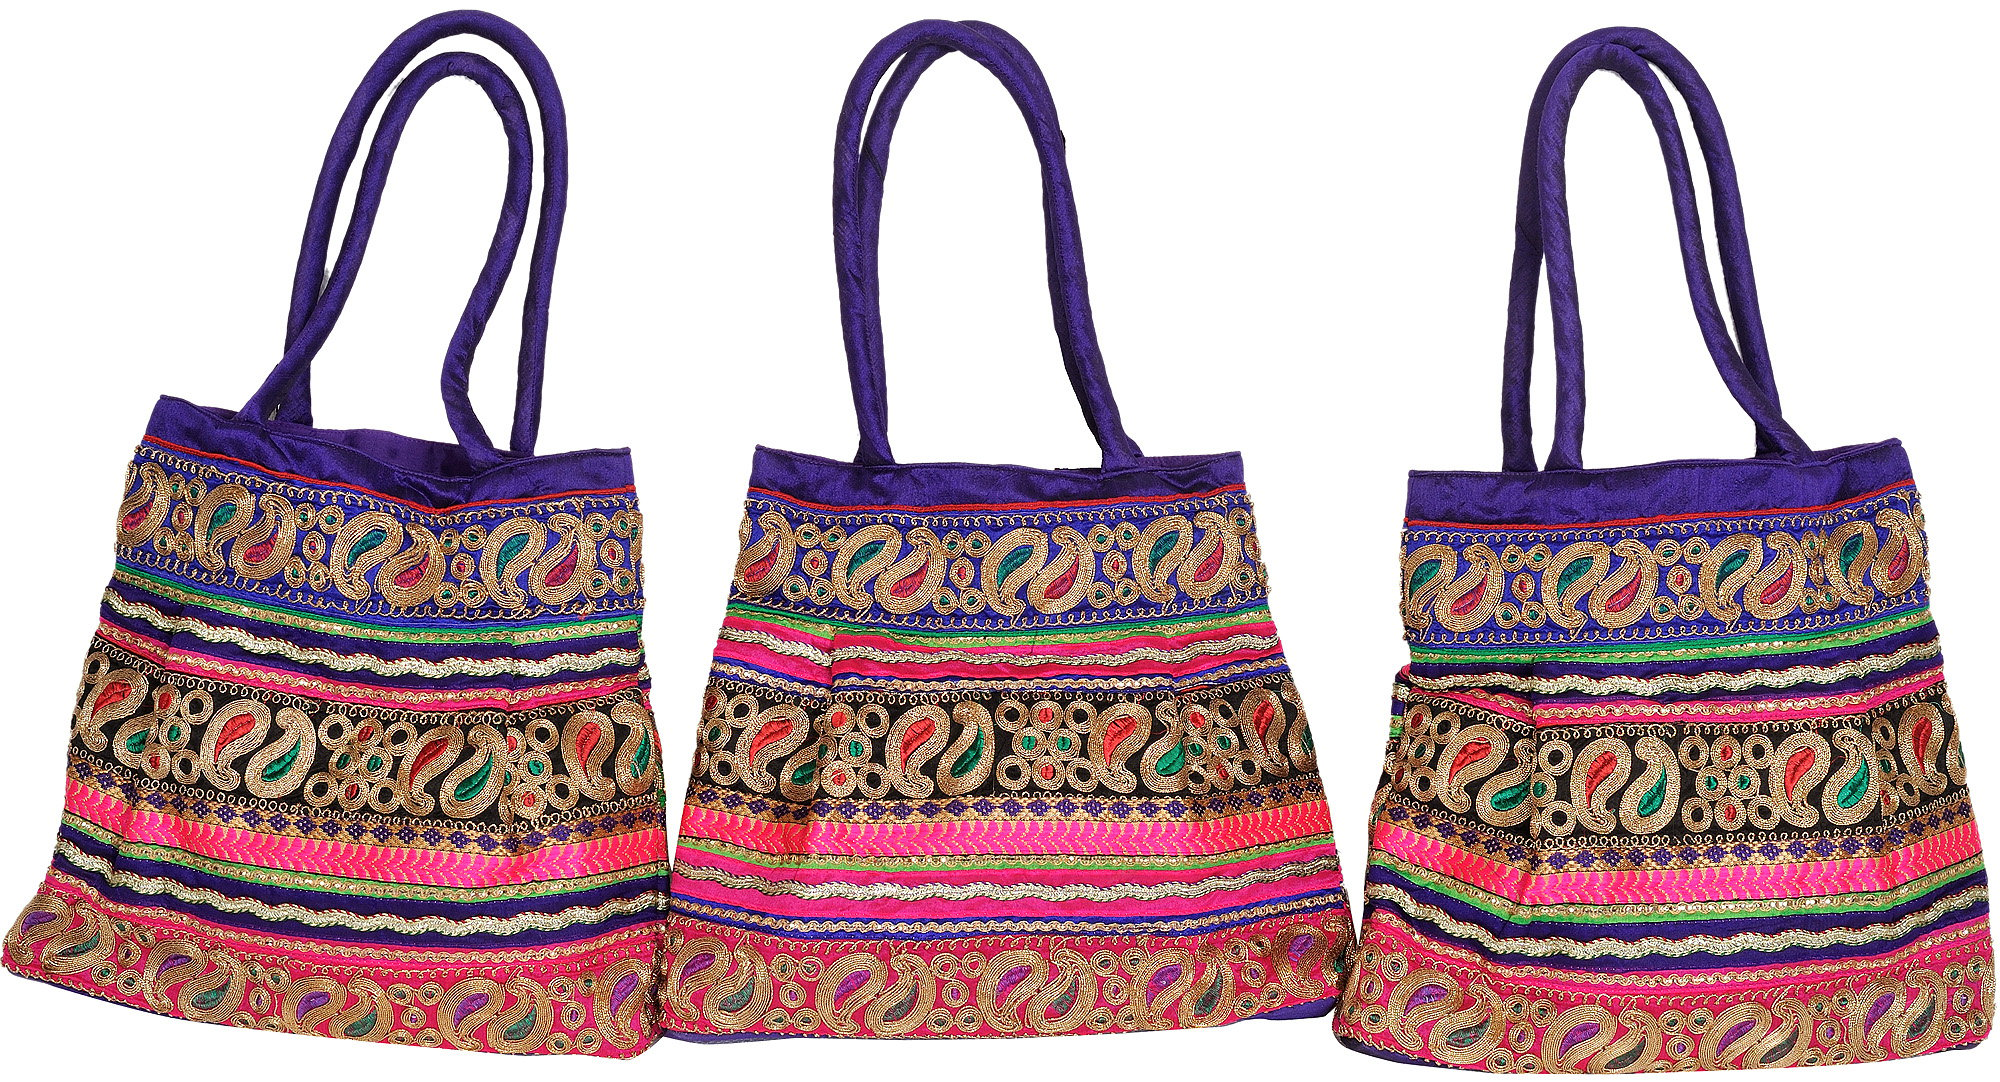 Lot of Three Shopper Bags with Embroidered Paisleys in Metallic Thread